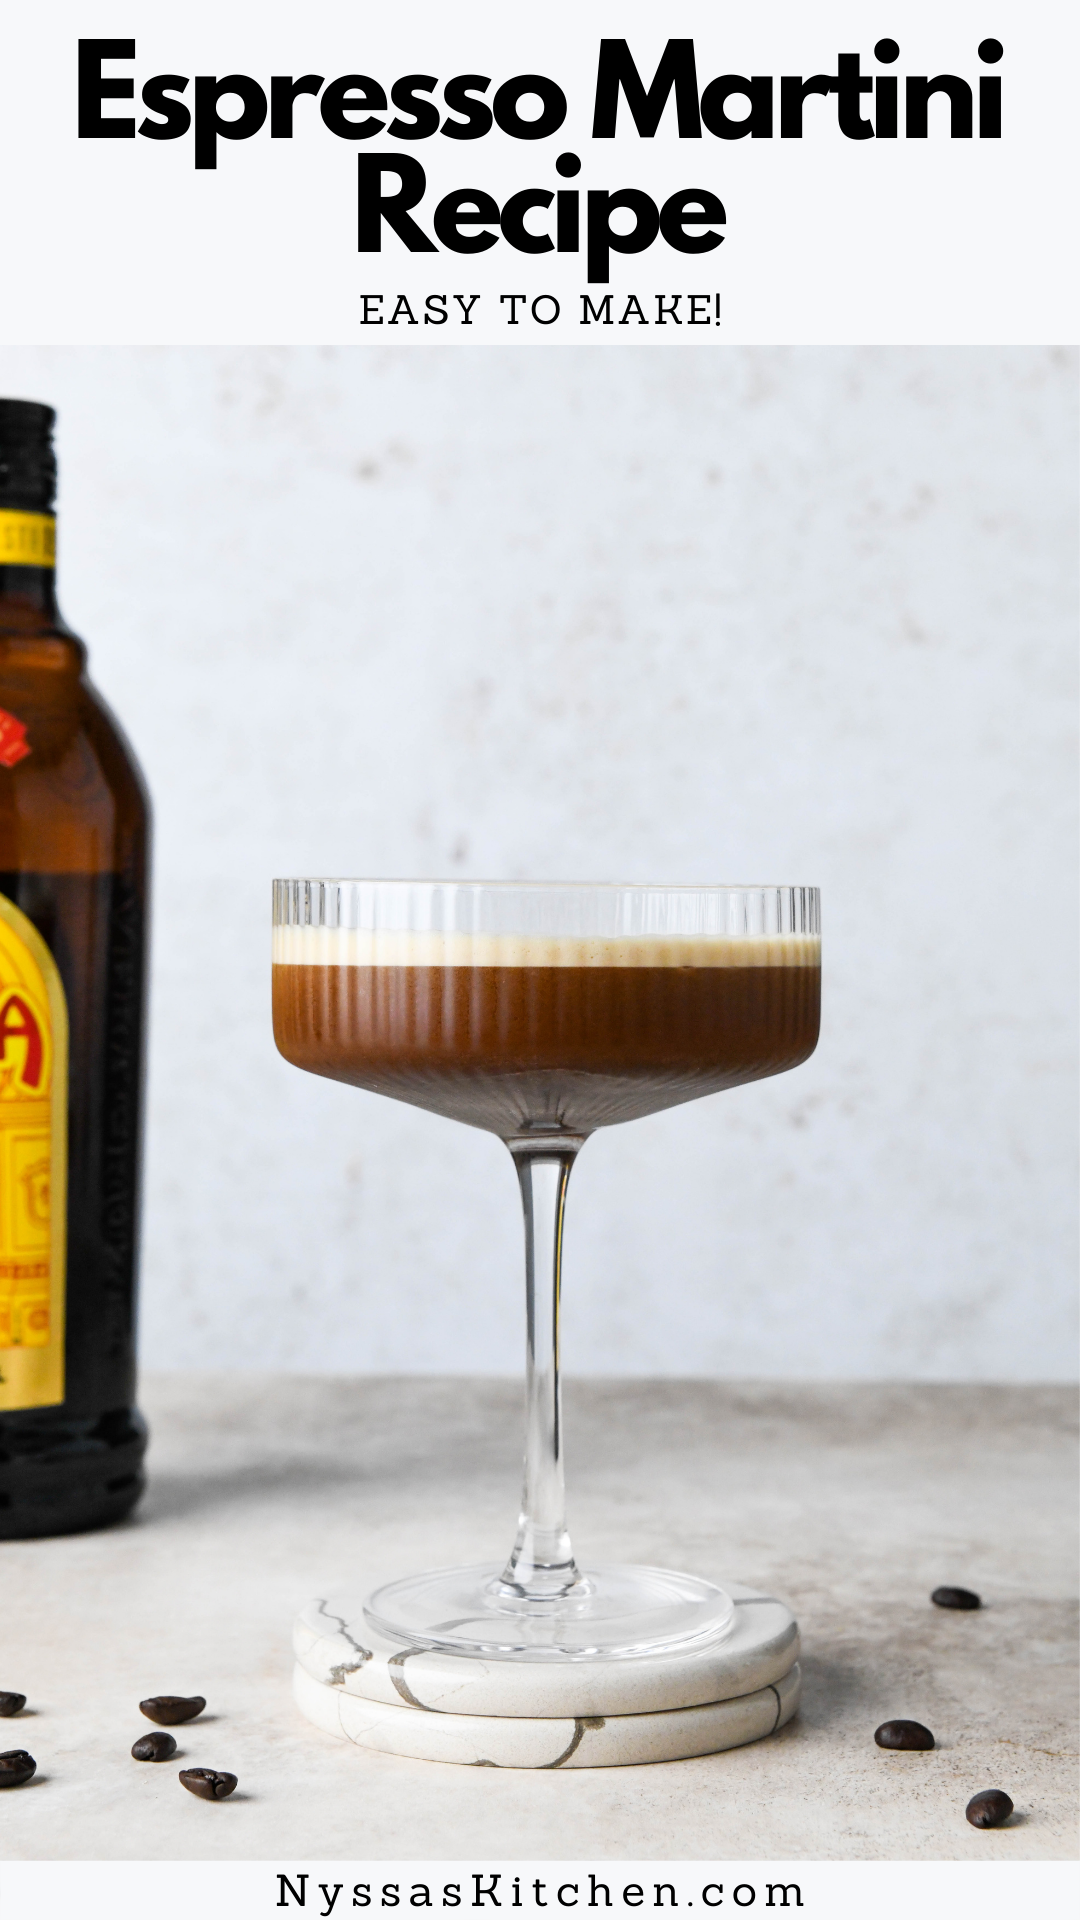 Let’s talk about how to make an espresso martini with both kahlua and vodka at home. This easy 5-minute espresso martini recipe is a bold and sweet cocktail with a foamy top that is a total crowd pleaser! It's the perfect after dinner drink made with a few simple ingredients (prepared instant coffee works well or hot espresso) and garnished with coffee beans. Creamy, extra easy, and totally dairy free!